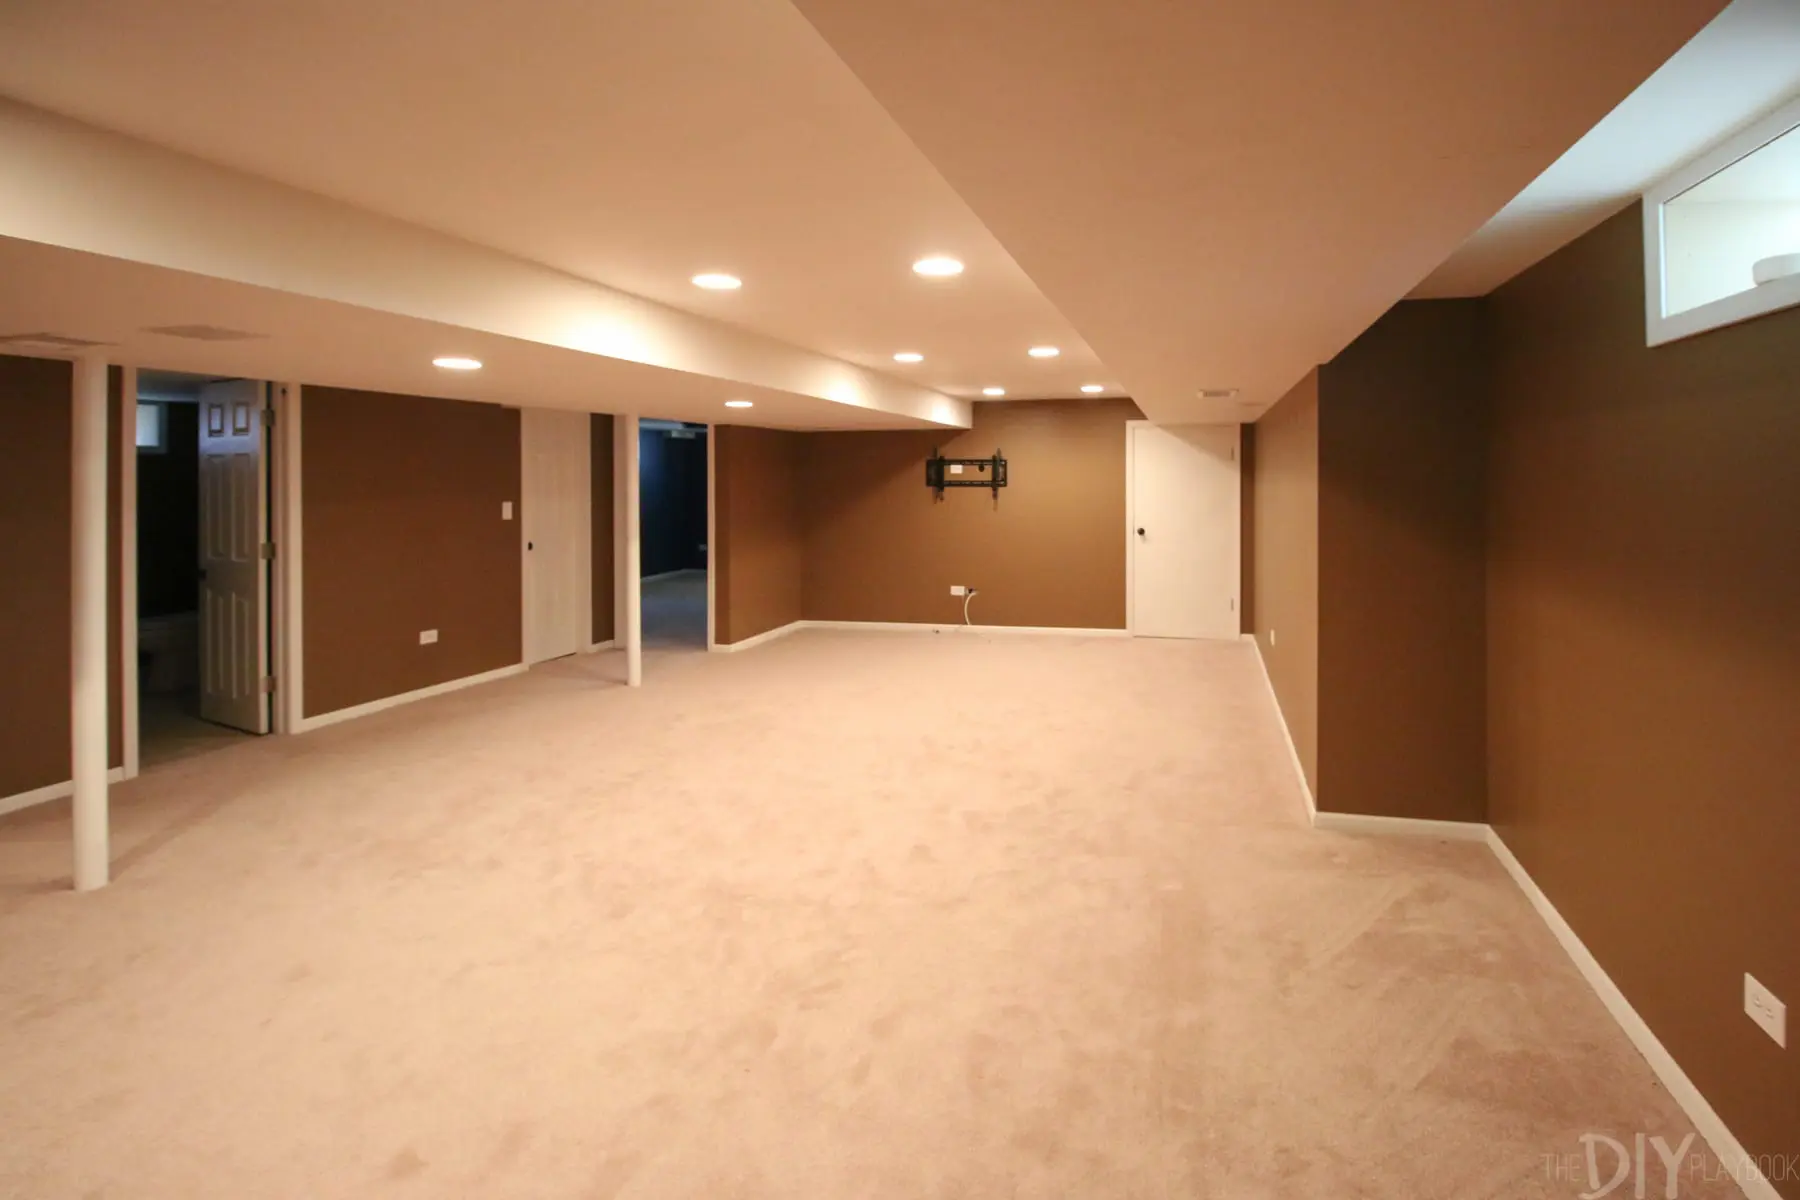 How far our basement has come! Can you believe how brown these walls are? These needed a serious paint job to lighten this space up. 